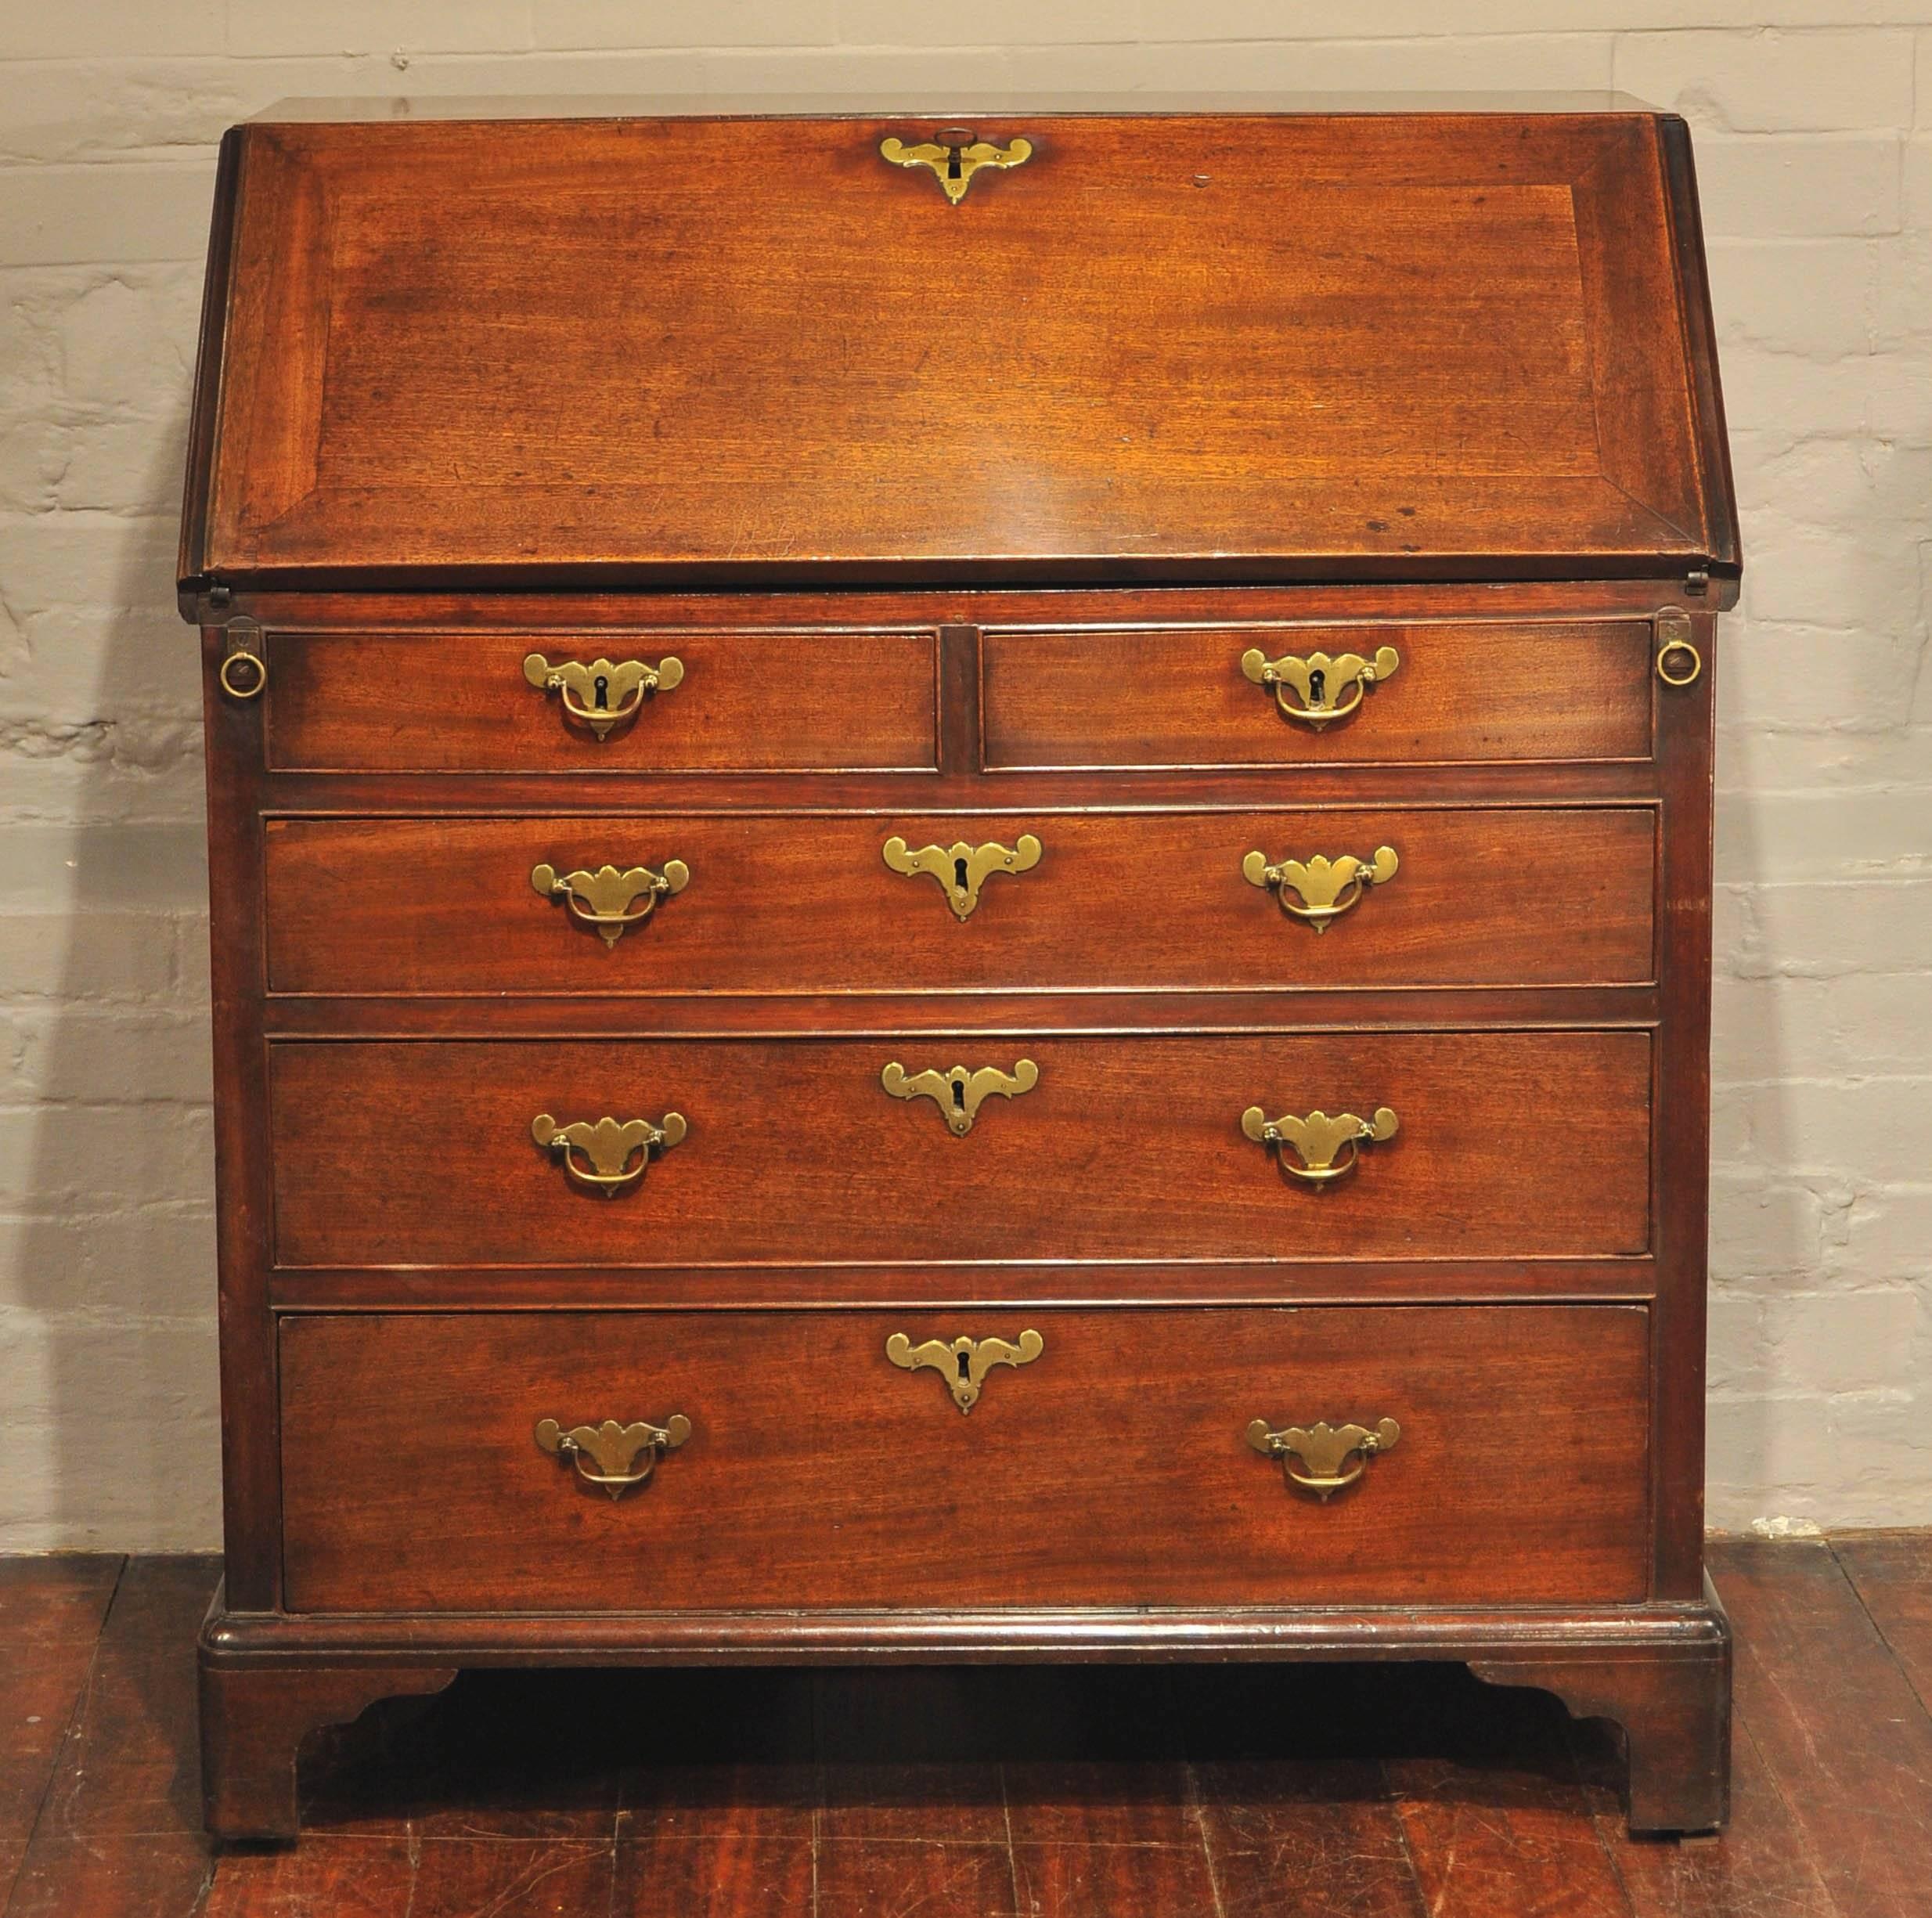 The beautifully fitted interior with secret compartments, herringbone inlay and classical column marquetry to the drawer and door fronts. The fall front, supported by lopers with their original ring pull handles, above two short and three long